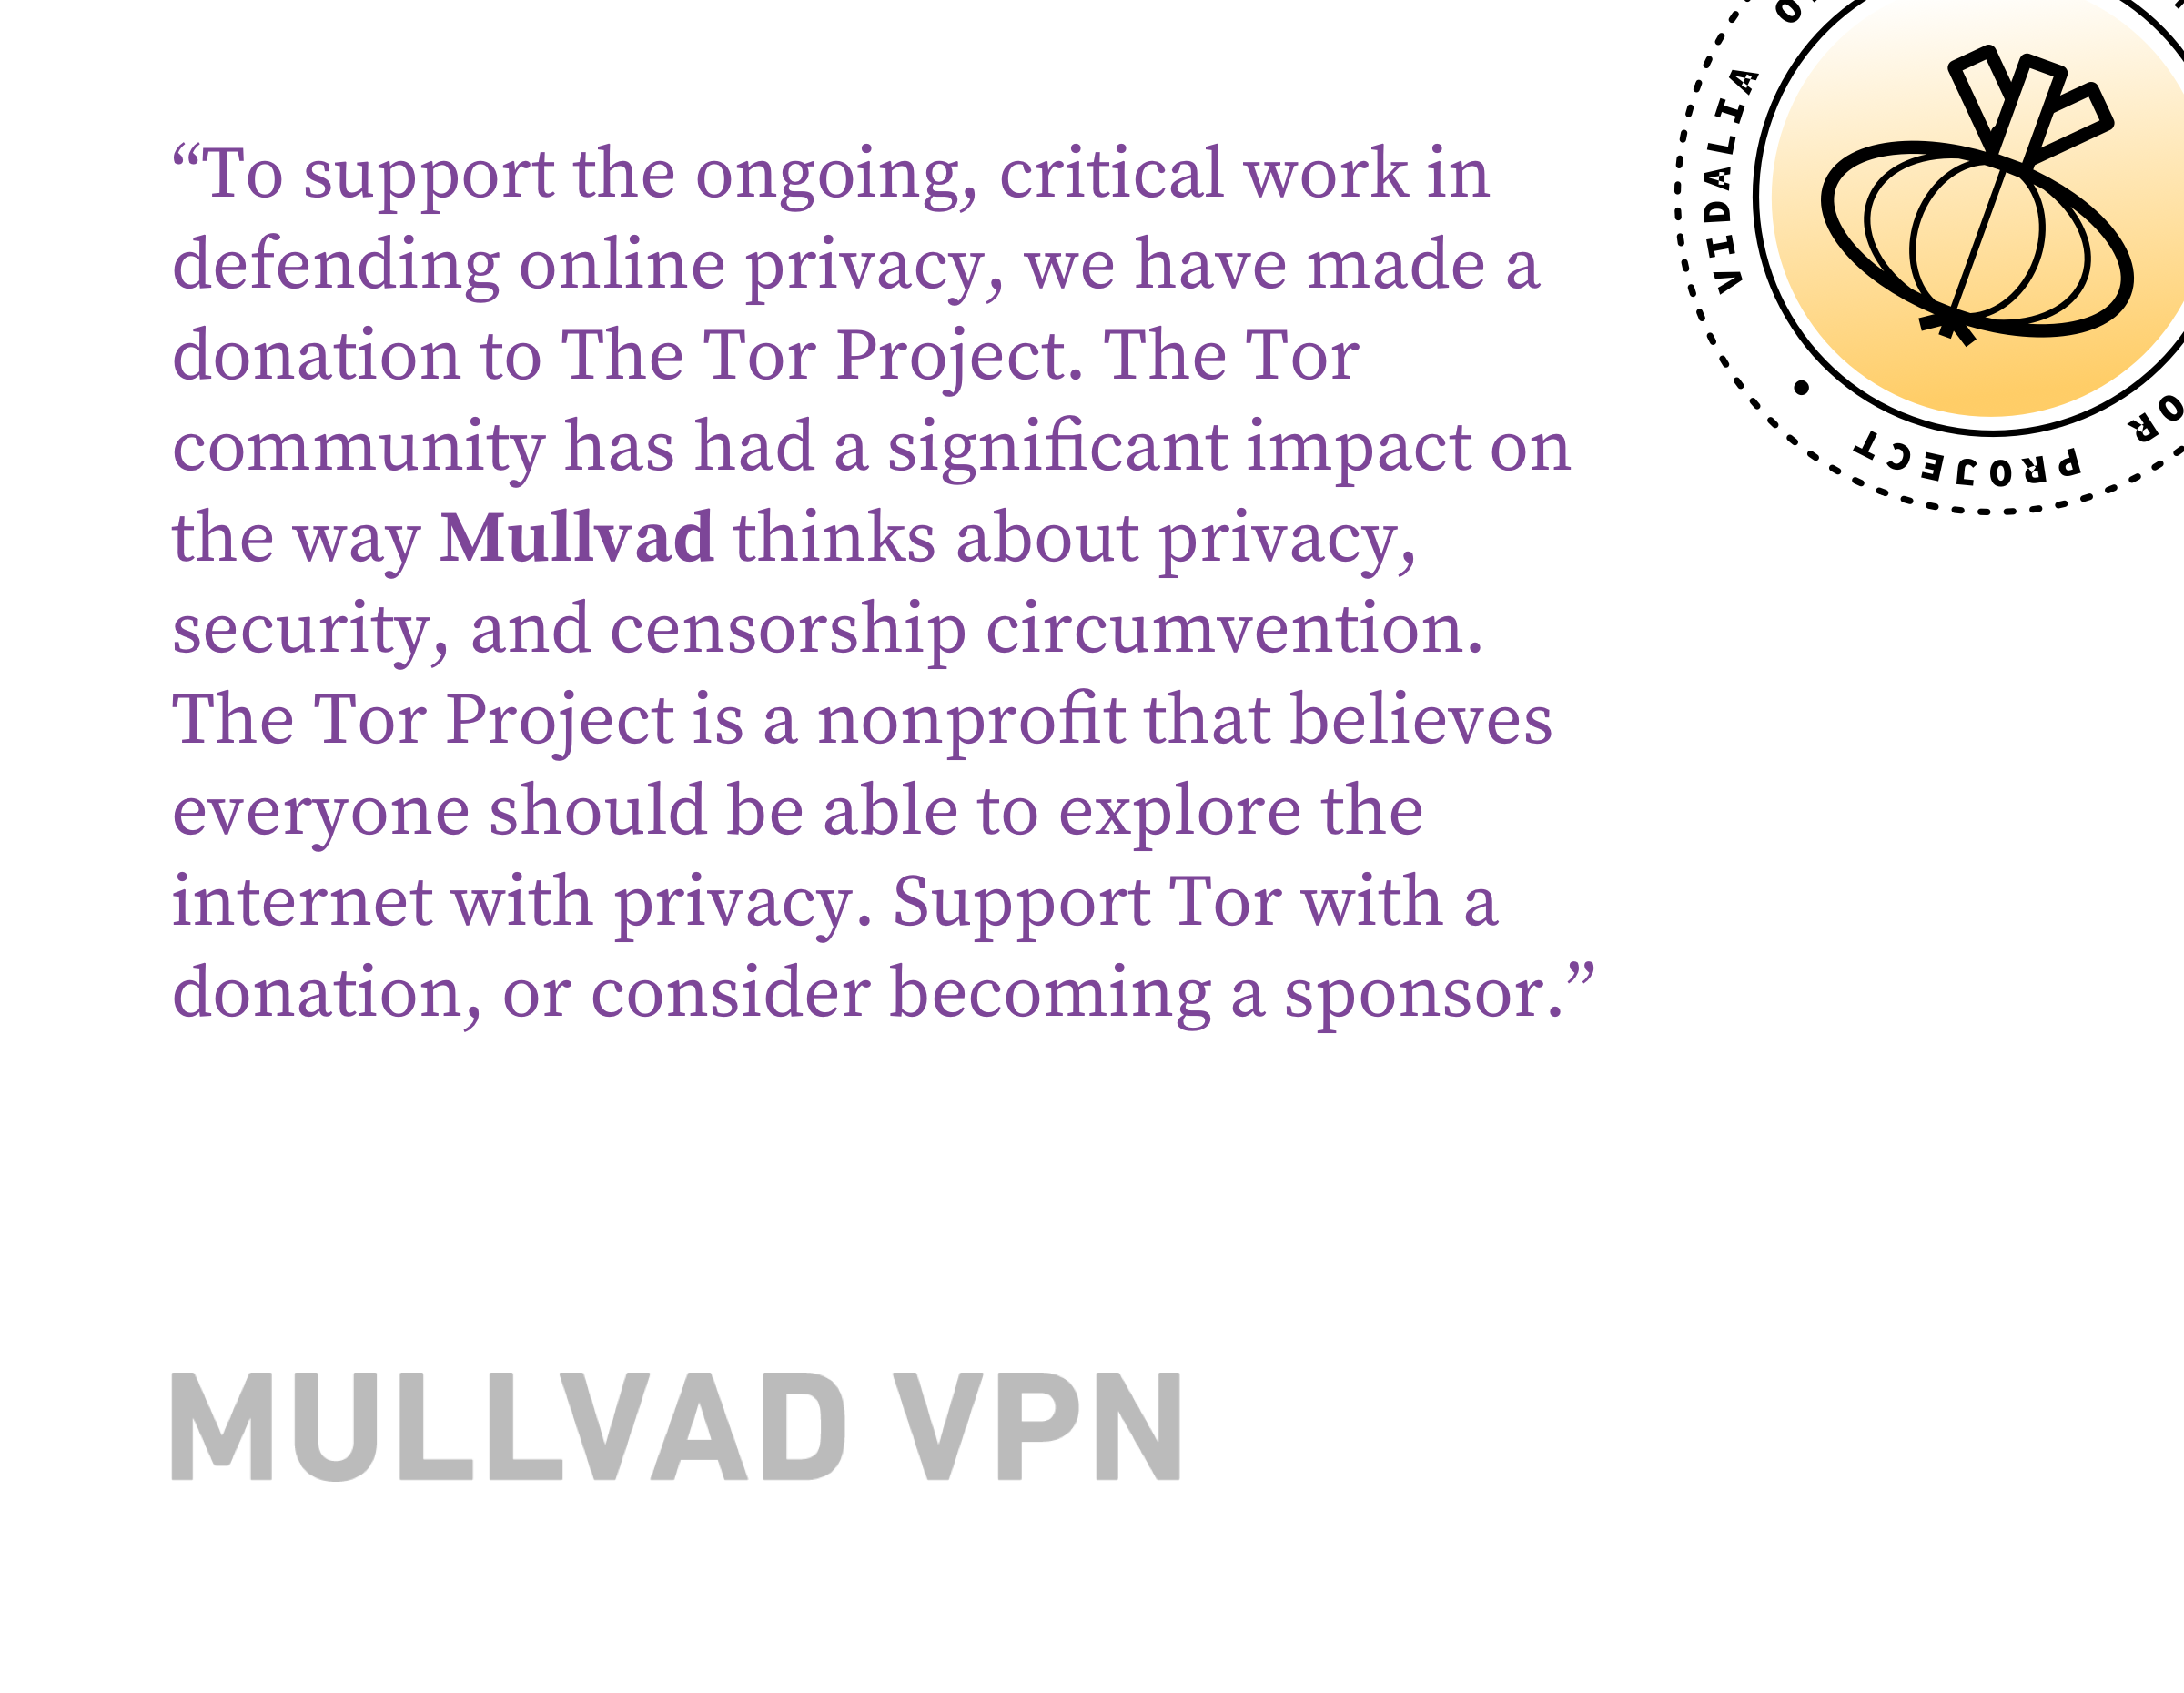 To support the ongoing, critical work in defending online privacy, we have made a donation to The Tor Project. The Tor community has had a significant impact on the way Mullvad thinks about privacy, security, and censorship circumvention. The Tor Project is a nonprofit that believes everyone should be able to explore the internet with privacy. Support Tor with a donation, or consider becoming a sponsor.